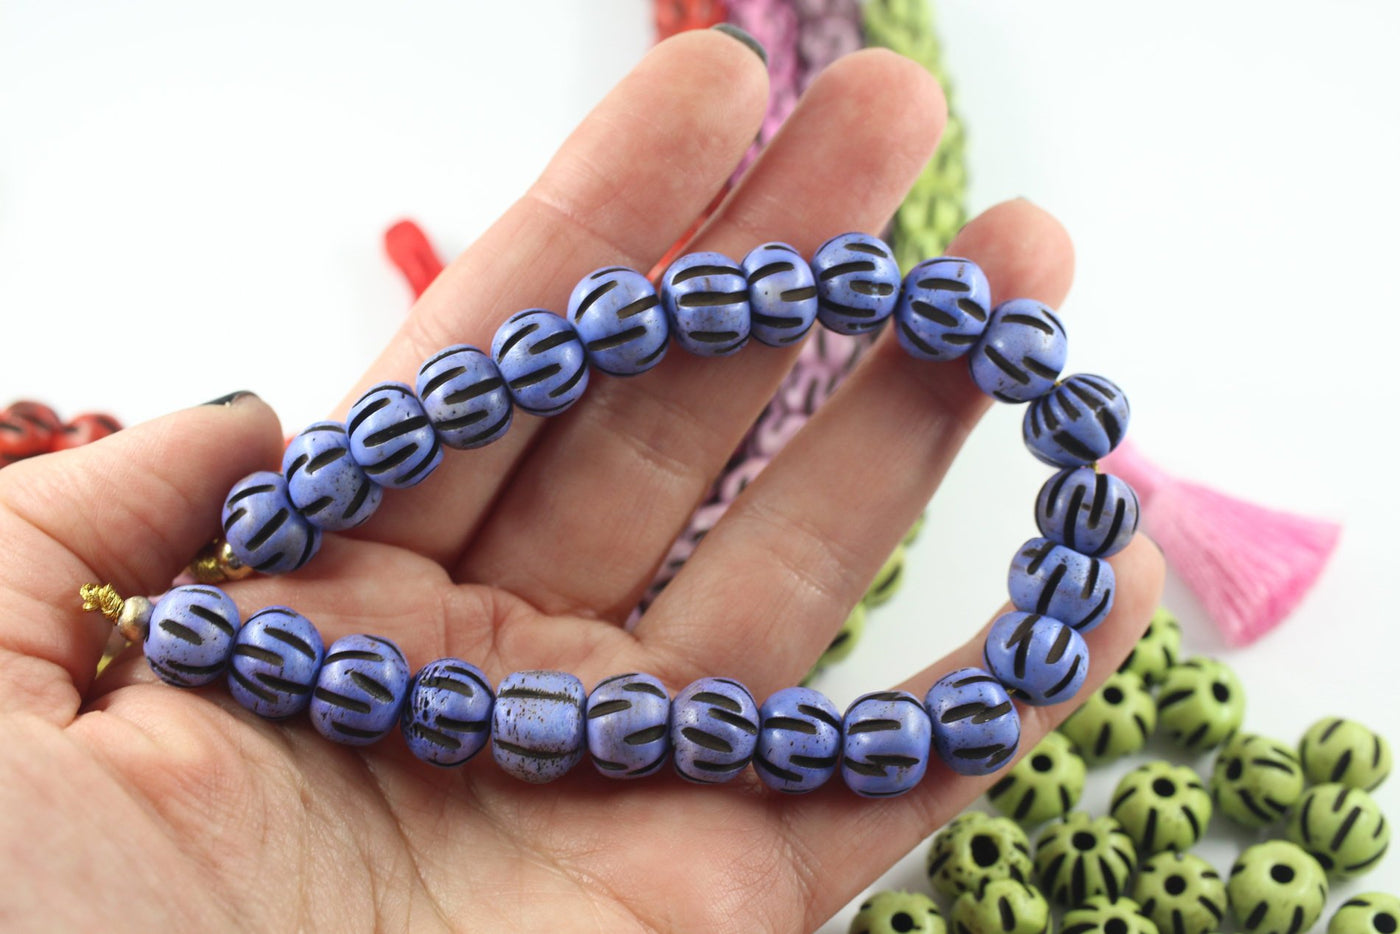 Hand Carved Melon Bone Beads, Bohemian Jewelry Making Supplies, Blue, Green Spacers from India